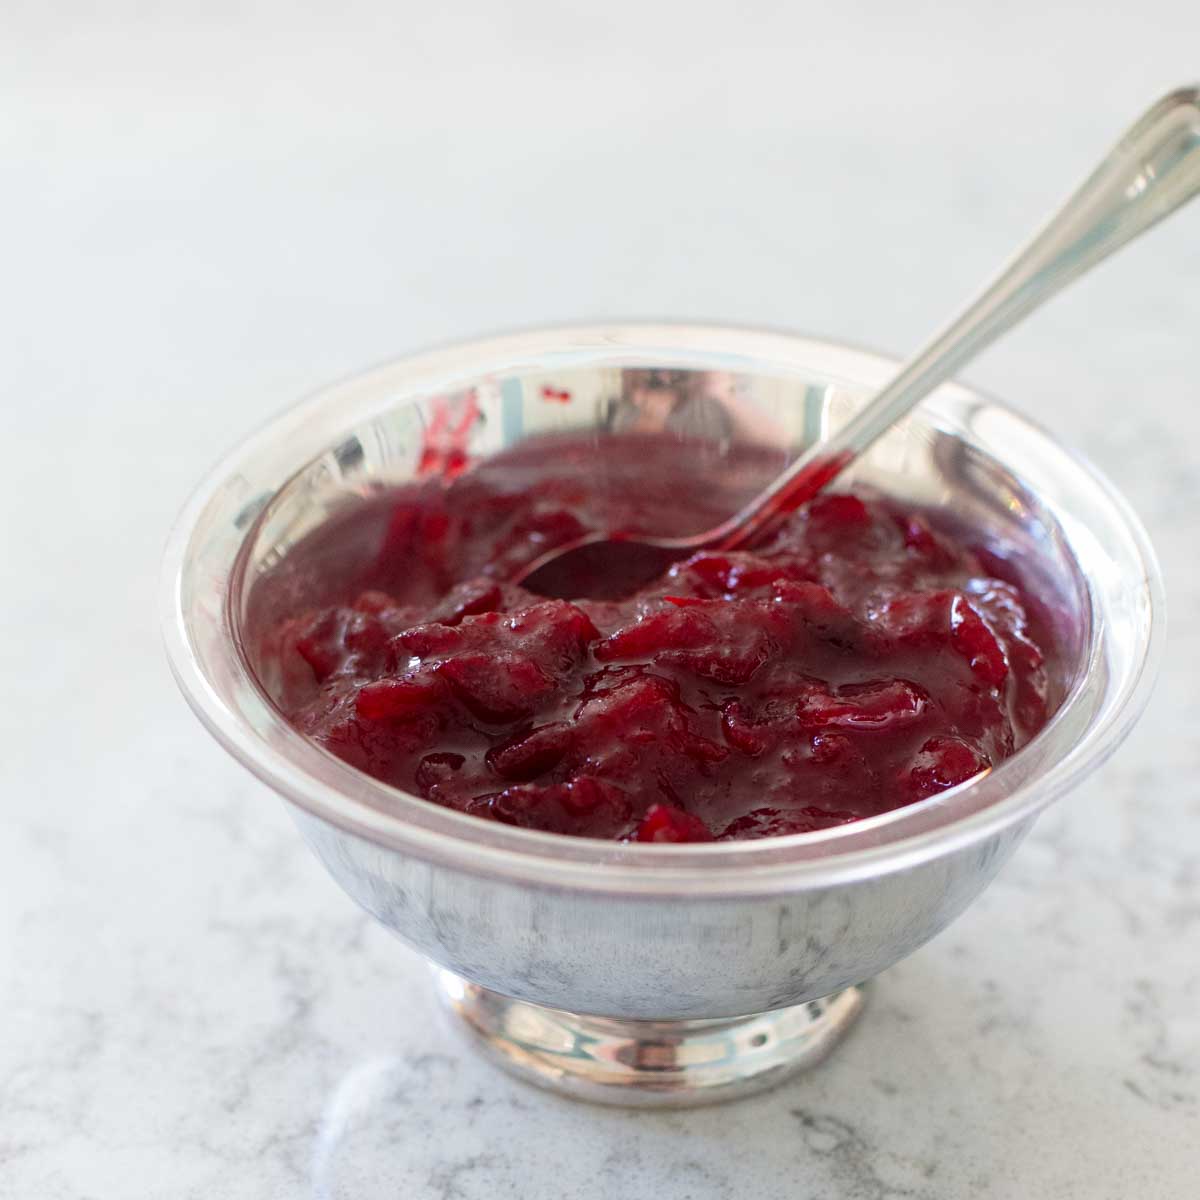 The cranberry sauce is in a silver serving bowl with a spoon.